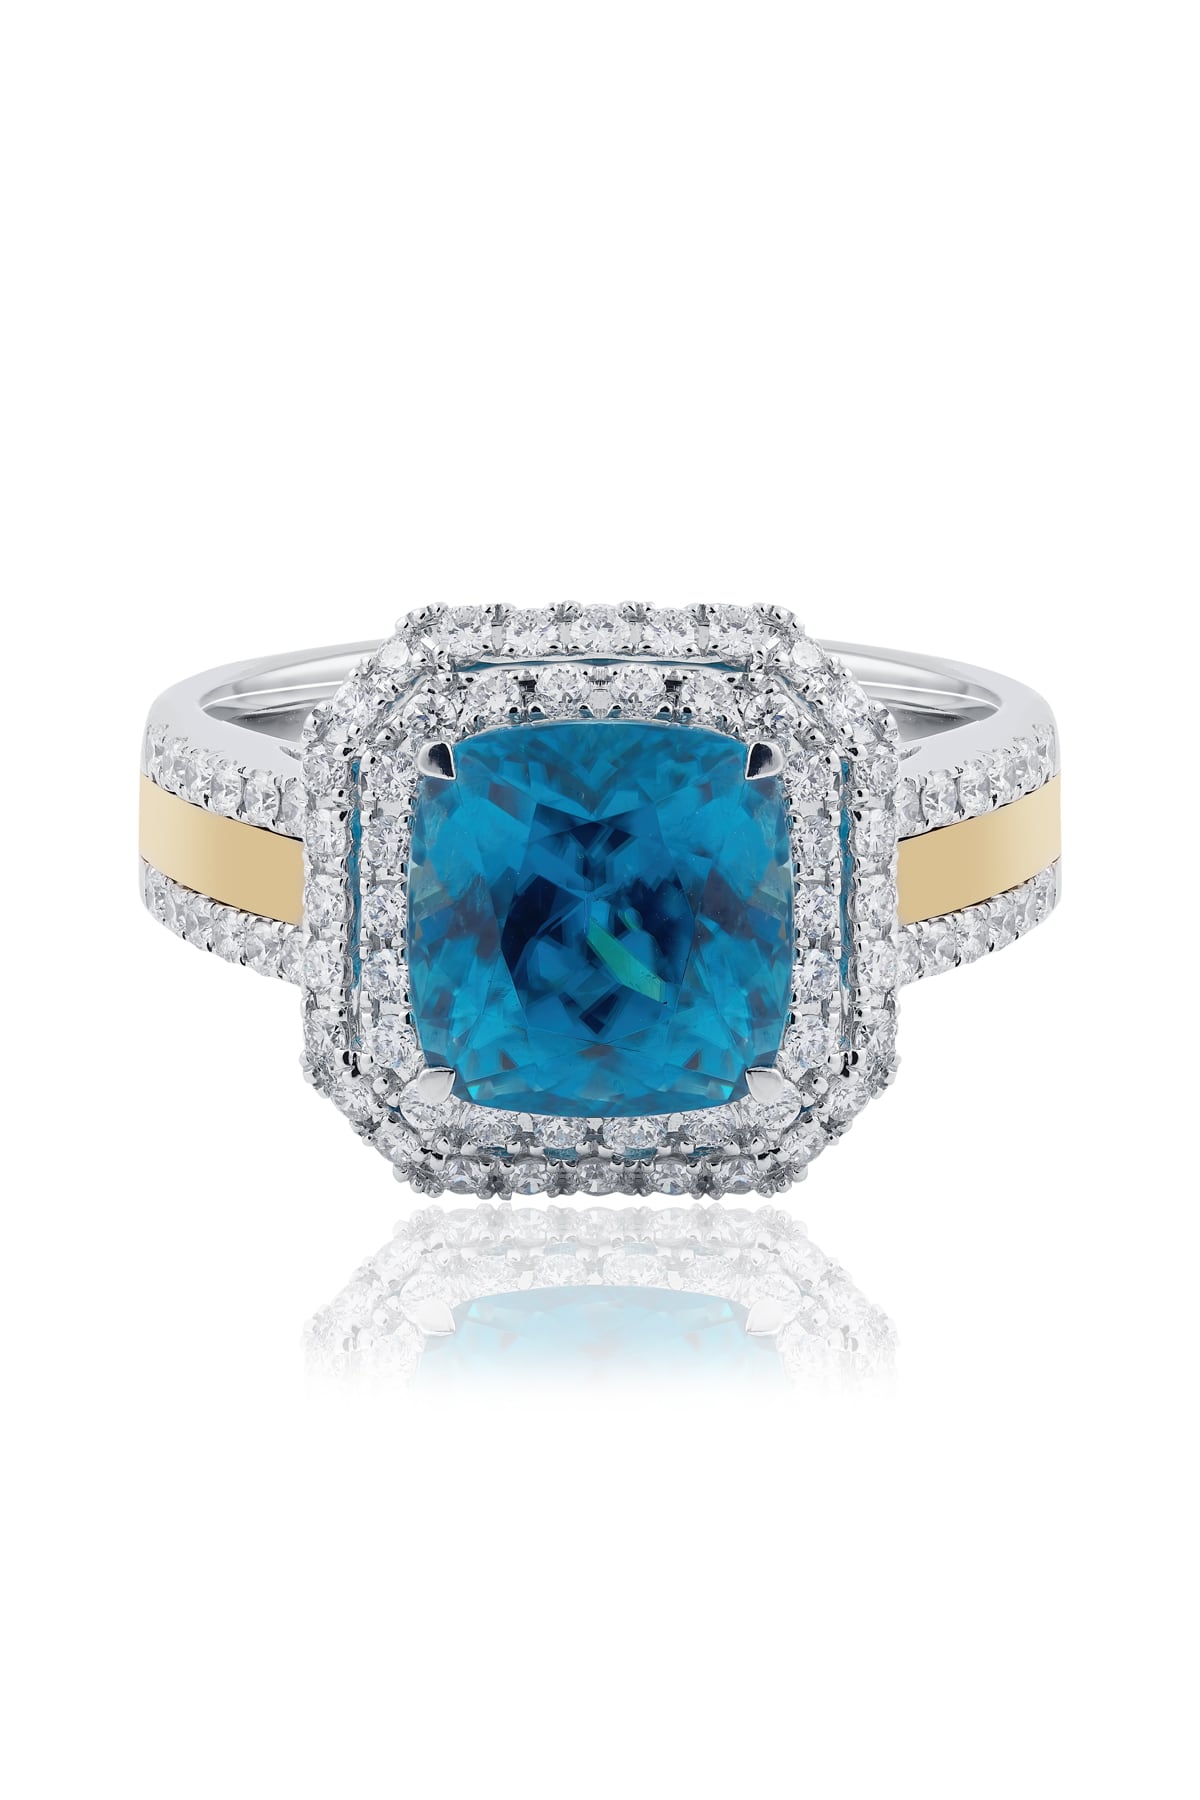 Cushion Cut Natural Blue Zircon Ring With Double Diamond Halo from LeGassick Jewellers Gold Coast.